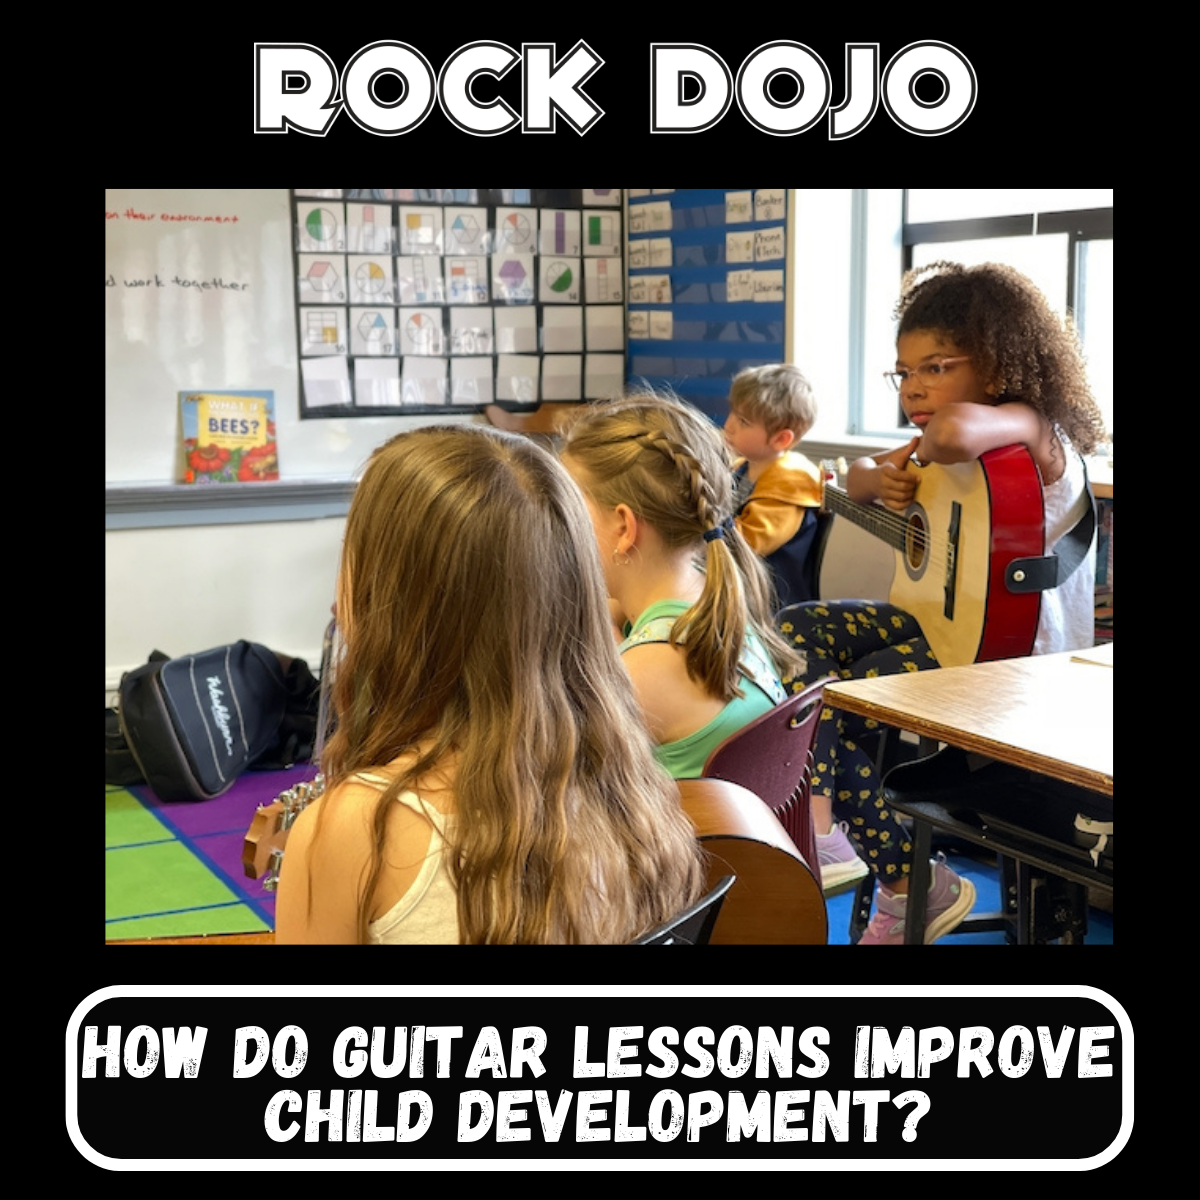 Children enjoying their time in Rock Dojo's after-school guitar lessons, improving their cognitive and social skills